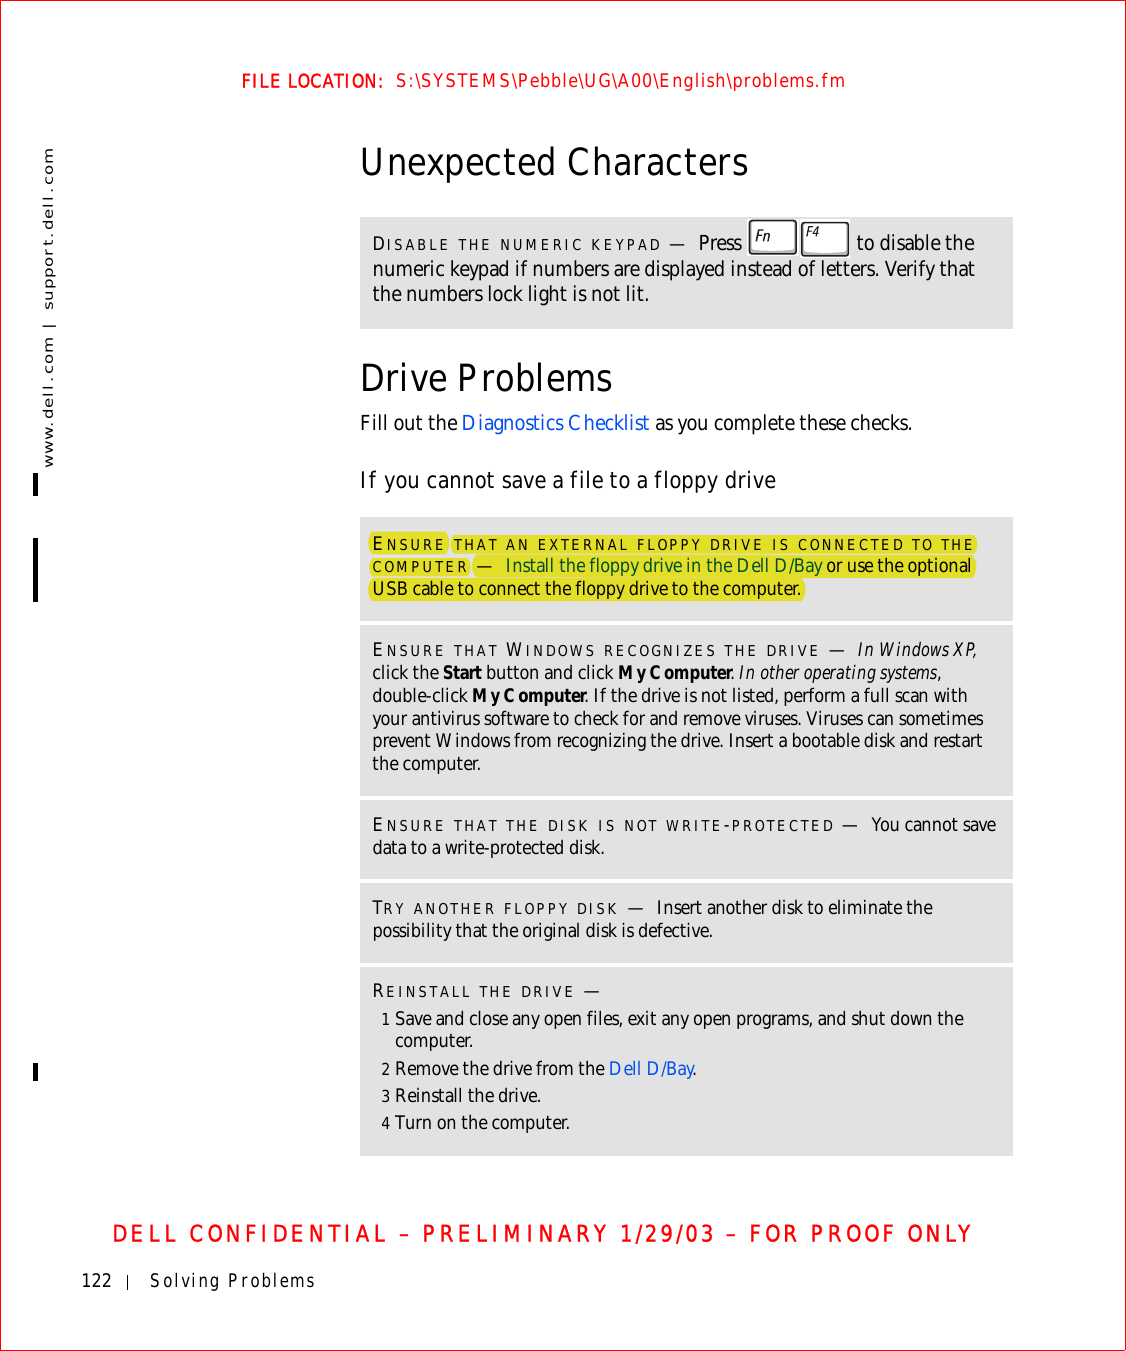 122 Solving Problemswww.dell.com | support.dell.comFILE LOCATION:  S:\SYSTEMS\Pebble\UG\A00\English\problems.fmDELL CONFIDENTIAL – PRELIMINARY 1/29/03 – FOR PROOF ONLYUnexpected CharactersDrive ProblemsFill out the Diagnostics Checklist as you complete these checks.If you cannot save a file to a floppy driveDISABLE THE NUMERIC KEYPAD —Press   to disable the numeric keypad if numbers are displayed instead of letters. Verify that the numbers lock light is not lit.ENSURE THAT AN EXTERNAL FLOPPY DRIVE IS CONNECTED TO THE COMPUTER —Install the floppy drive in the Dell D/Bay or use the optional USB cable to connect the floppy drive to the computer.ENSURE THAT WINDOWS RECOGNIZES THE DRIVE —In Windows XP, click the Start button and click My Computer. In other operating systems, double-click My Computer. If the drive is not listed, perform a full scan with your antivirus software to check for and remove viruses. Viruses can sometimes prevent Windows from recognizing the drive. Insert a bootable disk and restart the computer.ENSURE THAT THE DISK IS NOT WRITE-PROTECTED —You cannot save data to a write-protected disk. TRY ANOTHER FLOPPY DISK —Insert another disk to eliminate the possibility that the original disk is defective.REINSTALL THE DRIVE —1Save and close any open files, exit any open programs, and shut down the computer.2Remove the drive from the Dell D/Bay.3Reinstall the drive.4Turn on the computer.